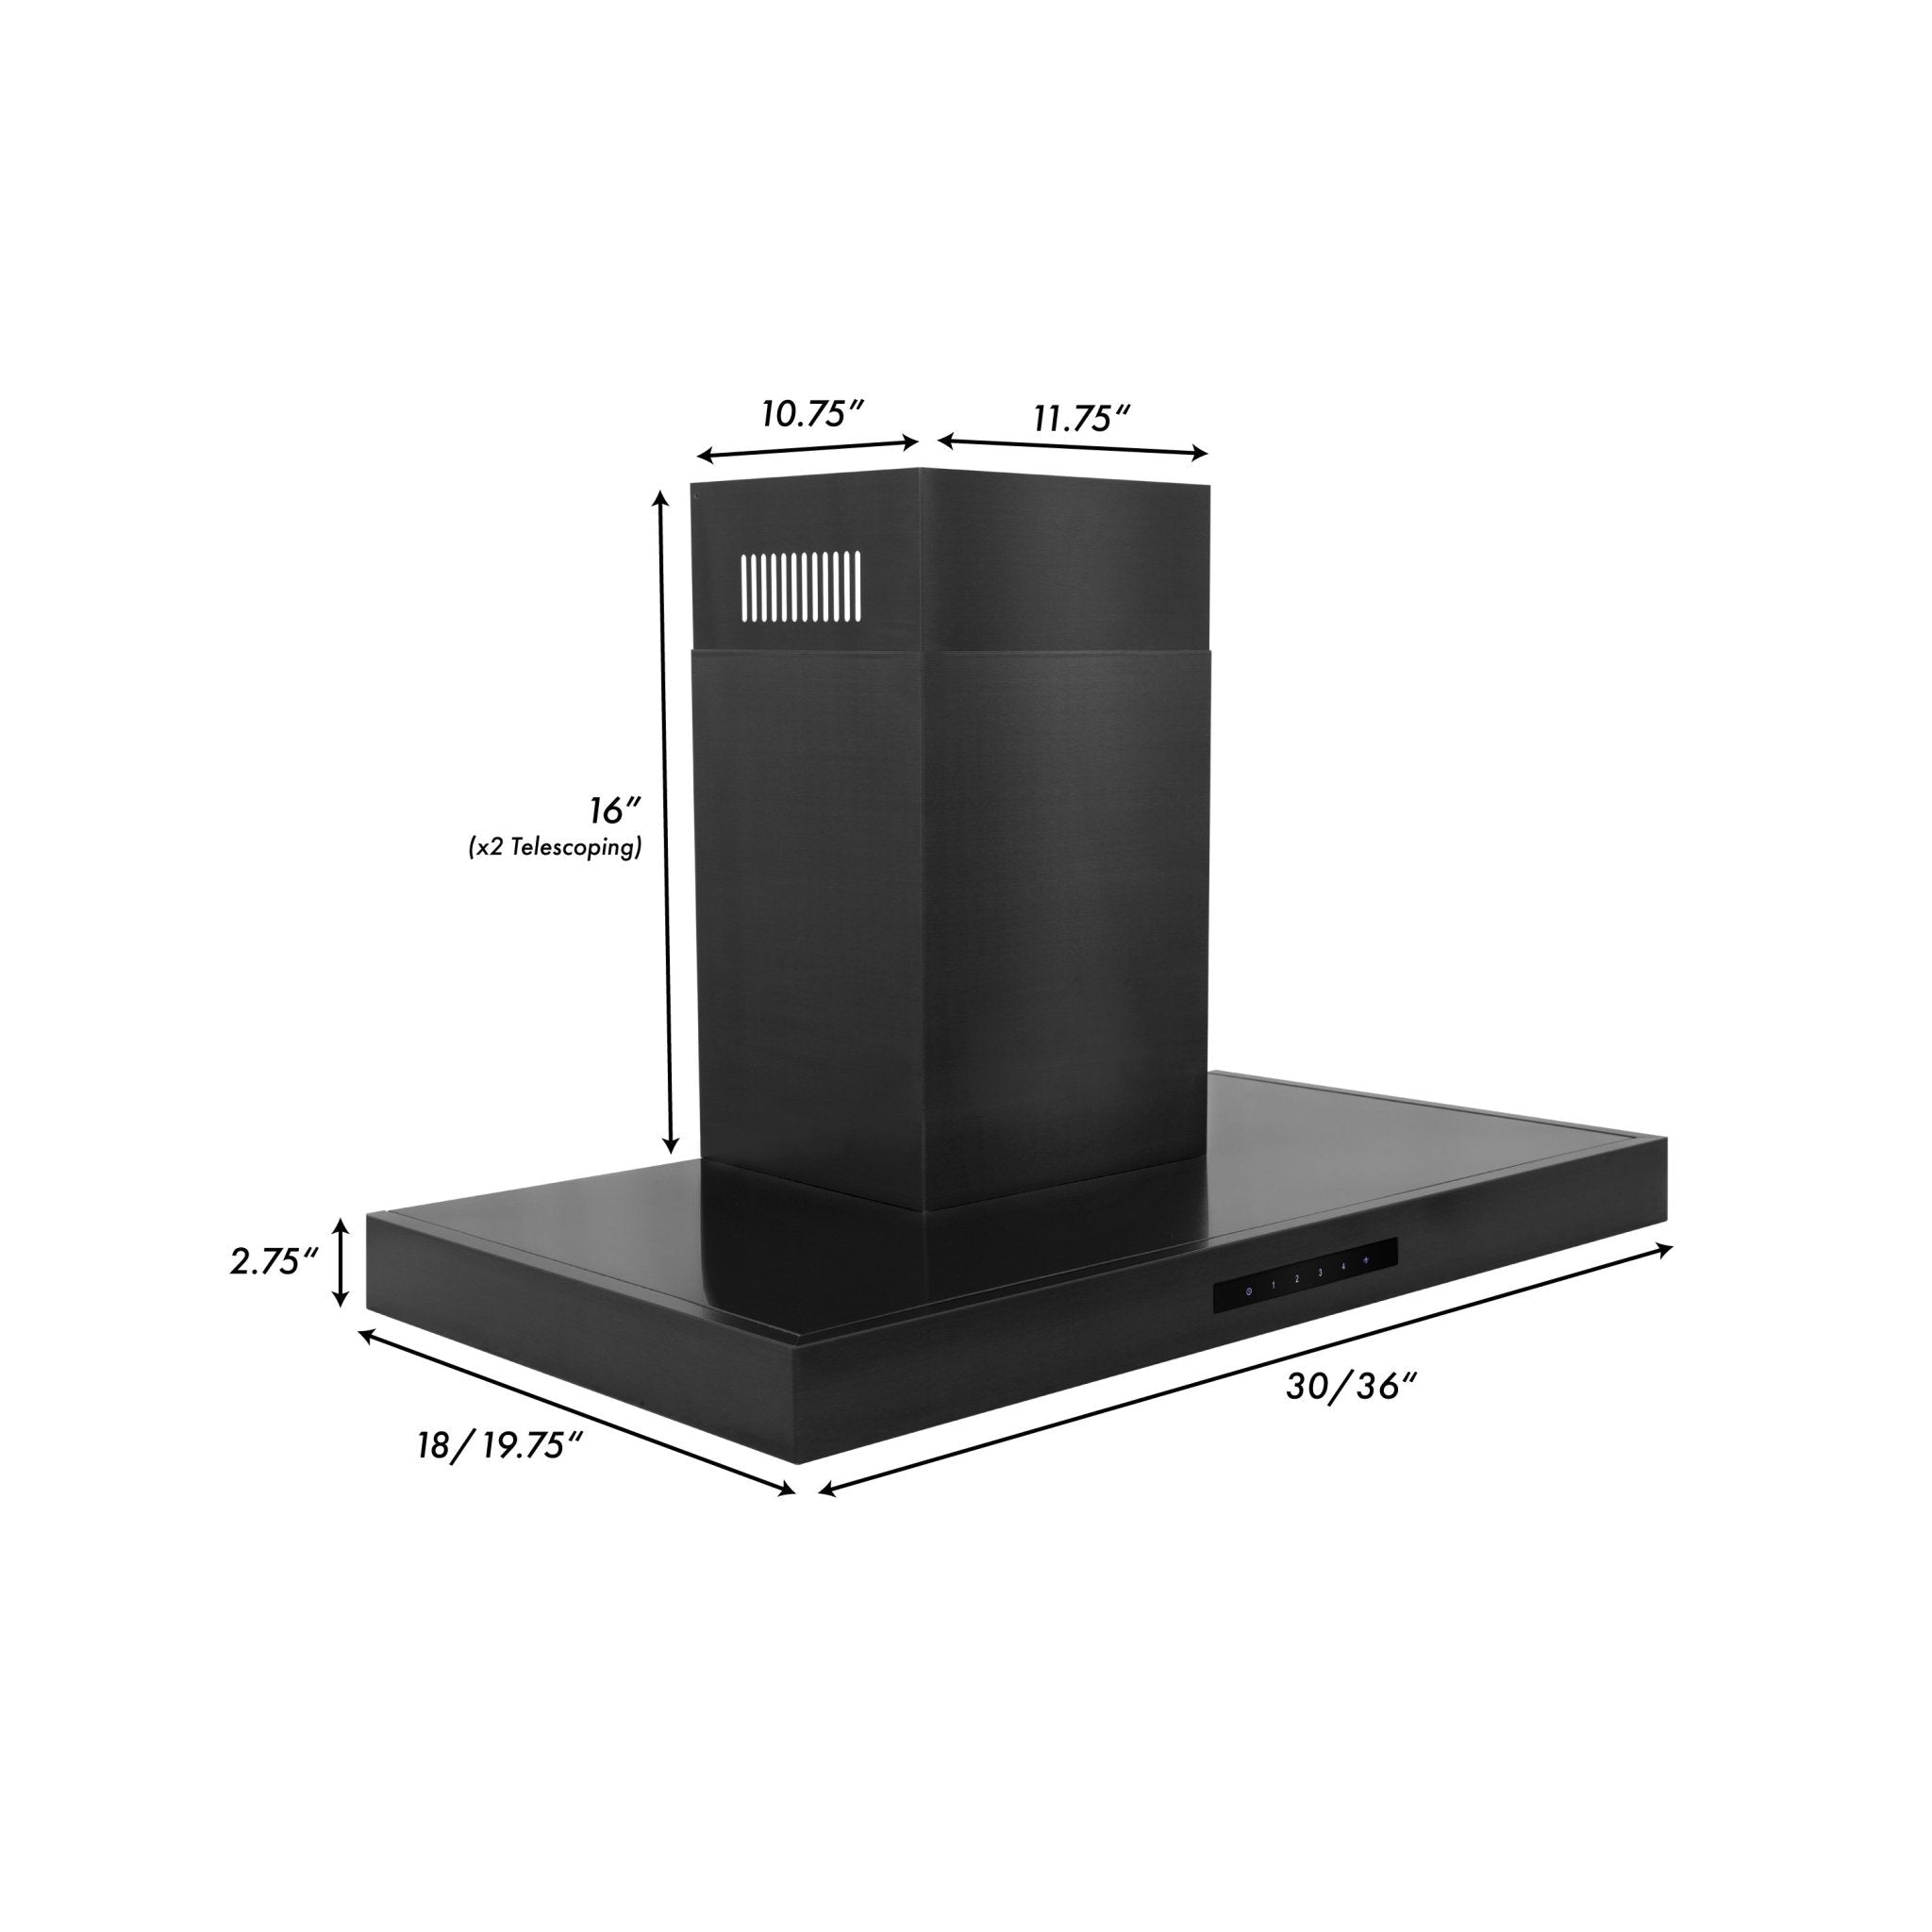 ZLINE Convertible Vent Wall Mount Range Hood in Black Stainless Steel (BSKEN) dimensional measurements for 30-inch and 36-inch model.